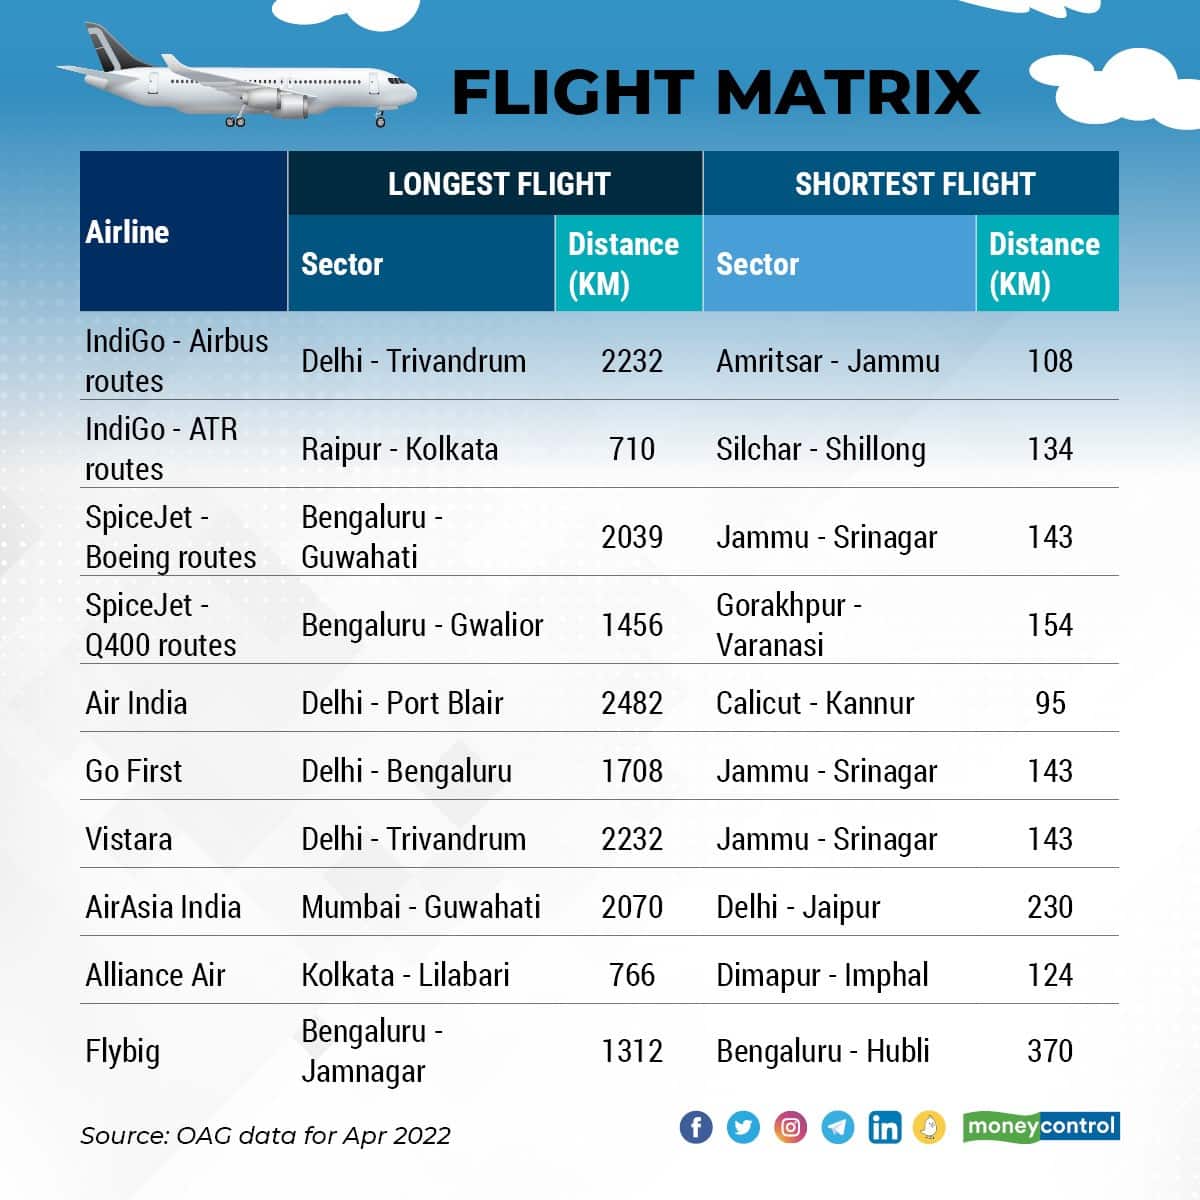 The longest and shortest routes in Indian aviation and the airlines